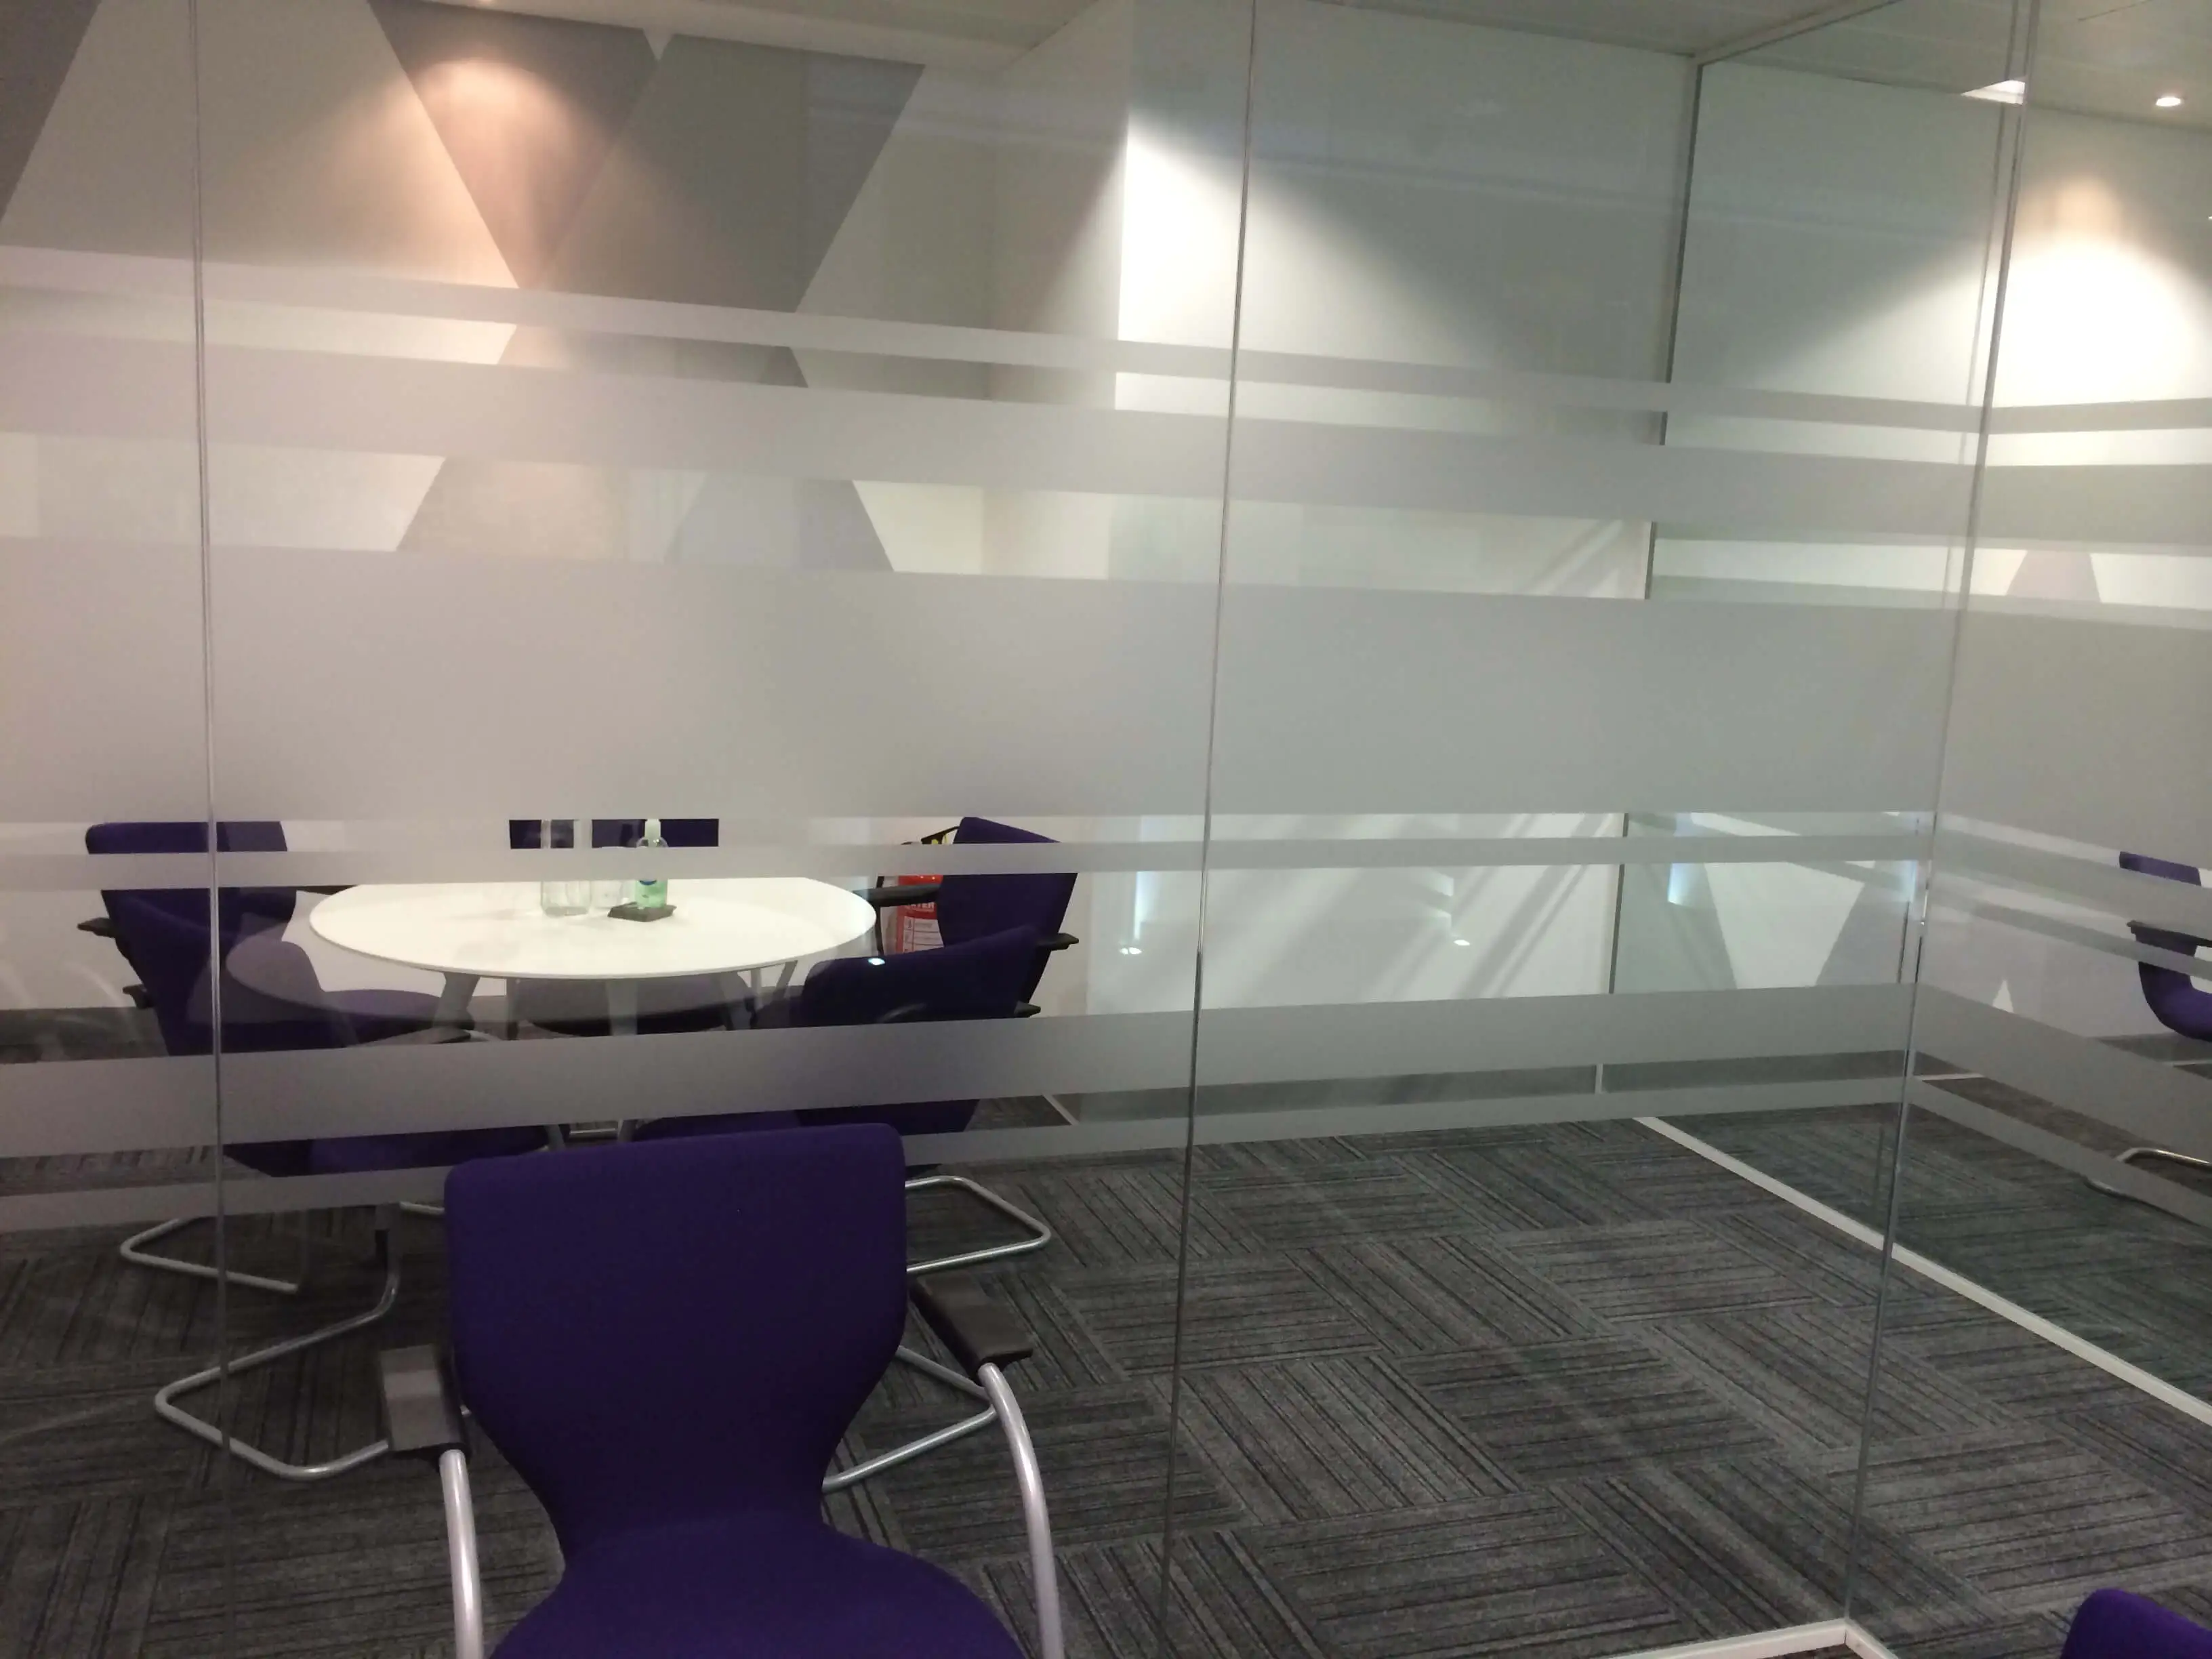 Manifestation on glass partitions of meeting room